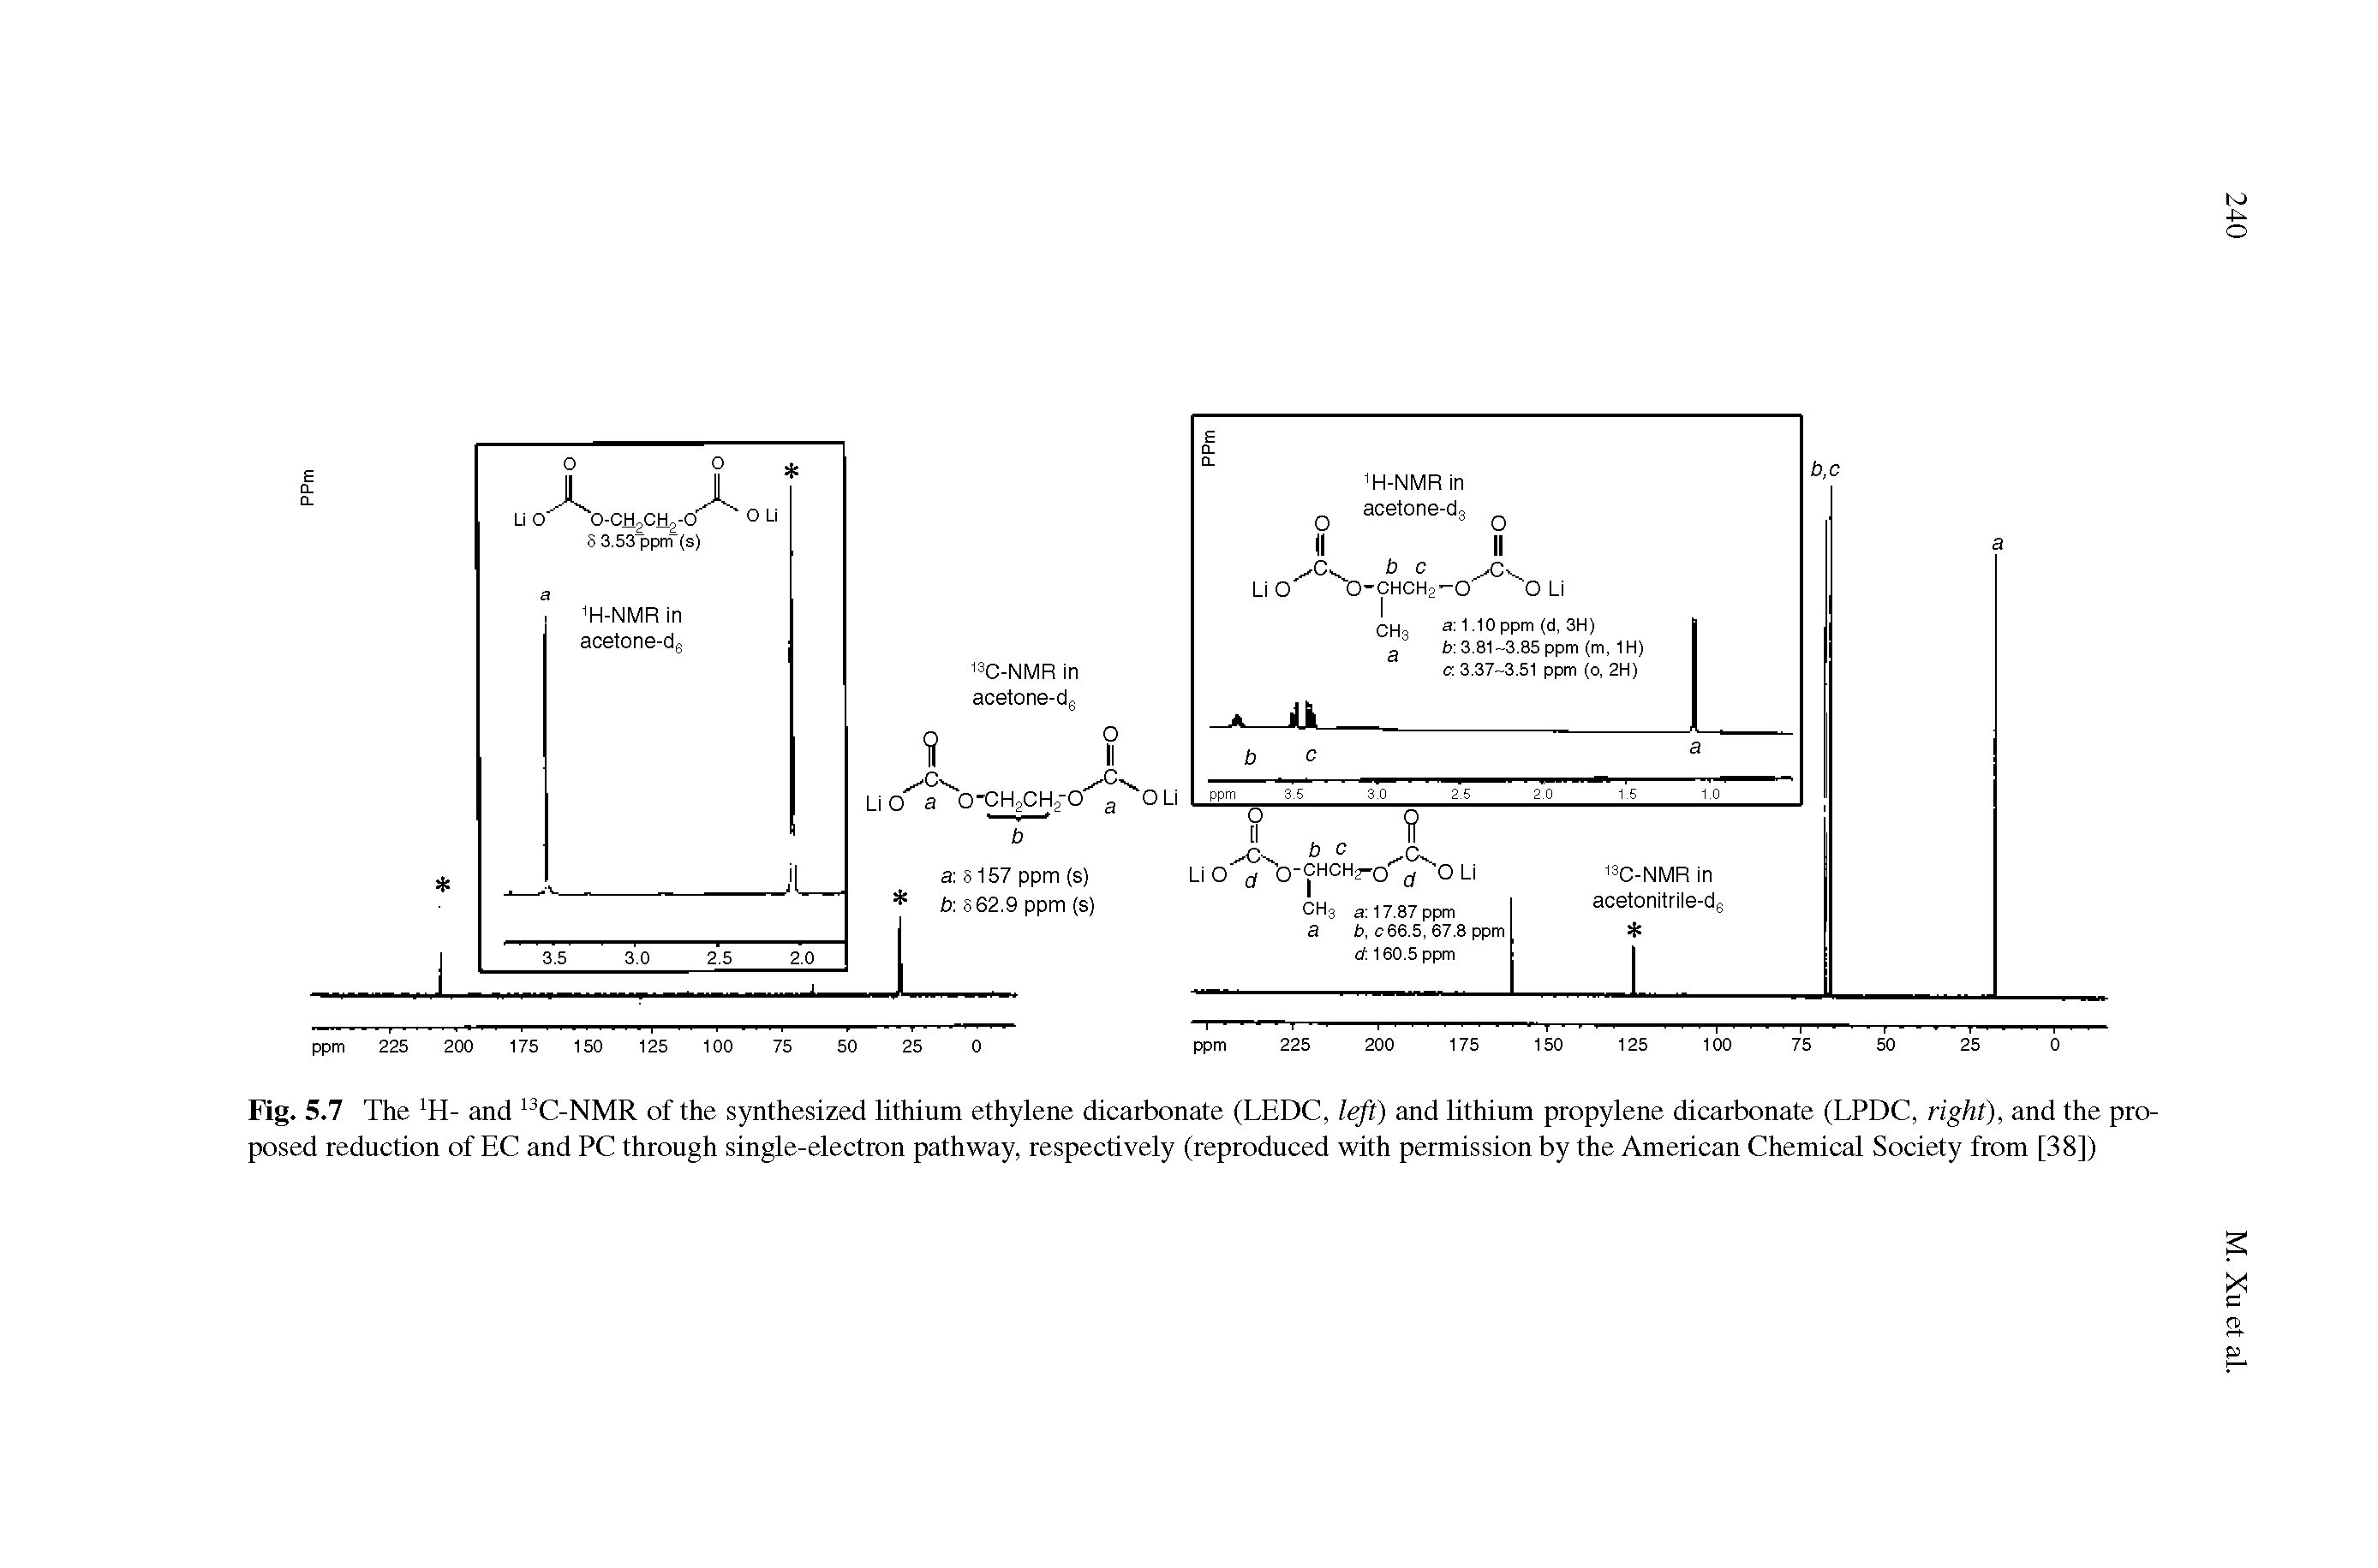 Fig. 5.7 The H- and C-NMR of the synthesized lithium ethylene dicarbonate (LEDC, left) and lithium propylene dicarbonate (LPDC, right), and the proposed reduction of EC and PC through single-electron pathway, respectively (reproduced with permission by the American Chemical Society from [38])...